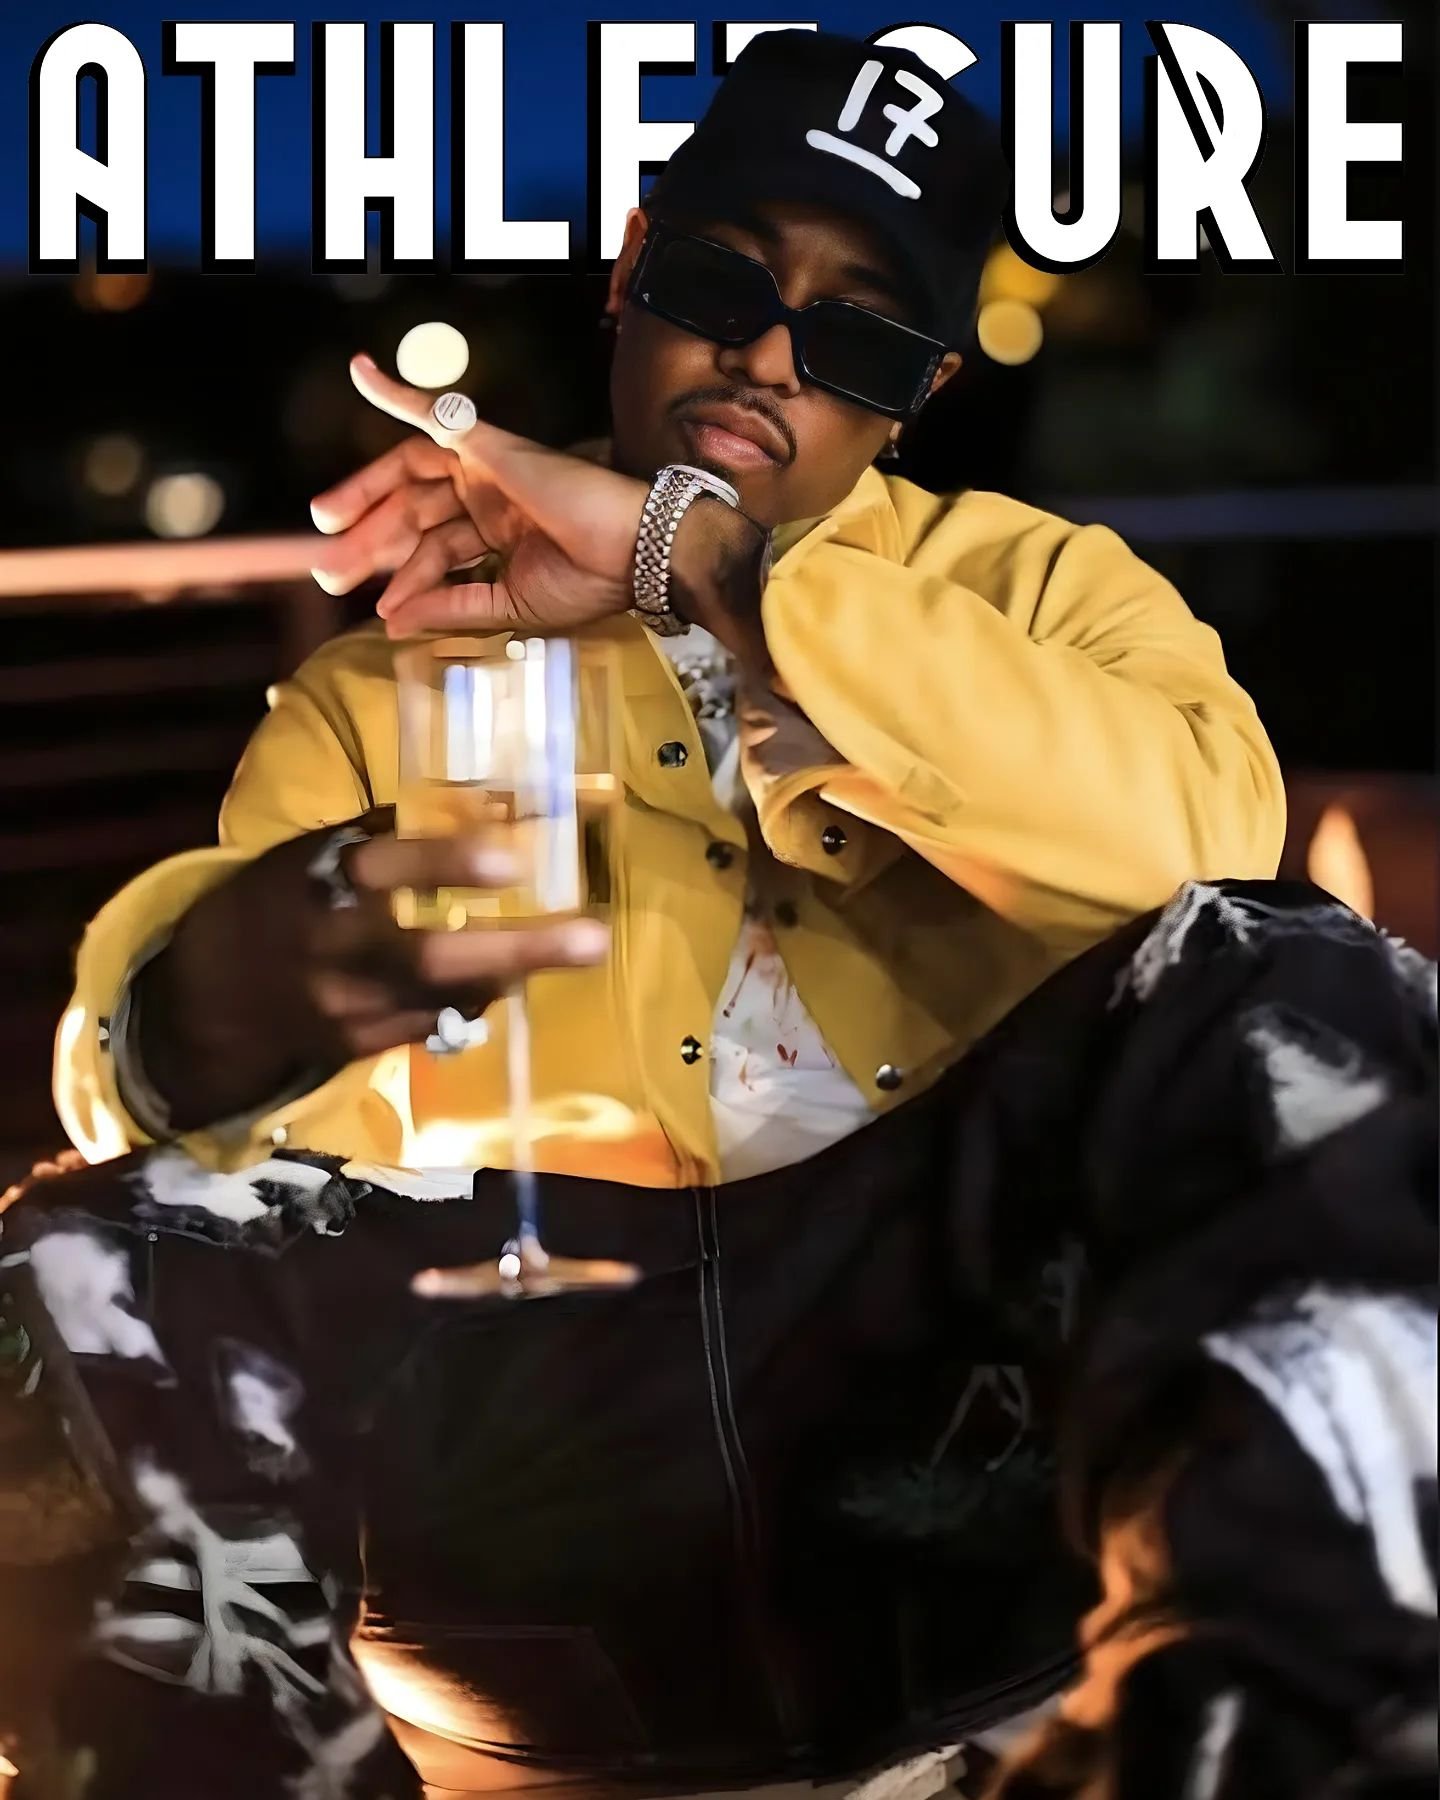 Last night we dropped the 100th issue of @athleisuremag and are covered by #Grammy nominated #singer #songwriter @jeremih we talk about his career, his chart topping song #BirthdaySex, and his @birthdaysexwine! 

As the cofounder/creative + style dir